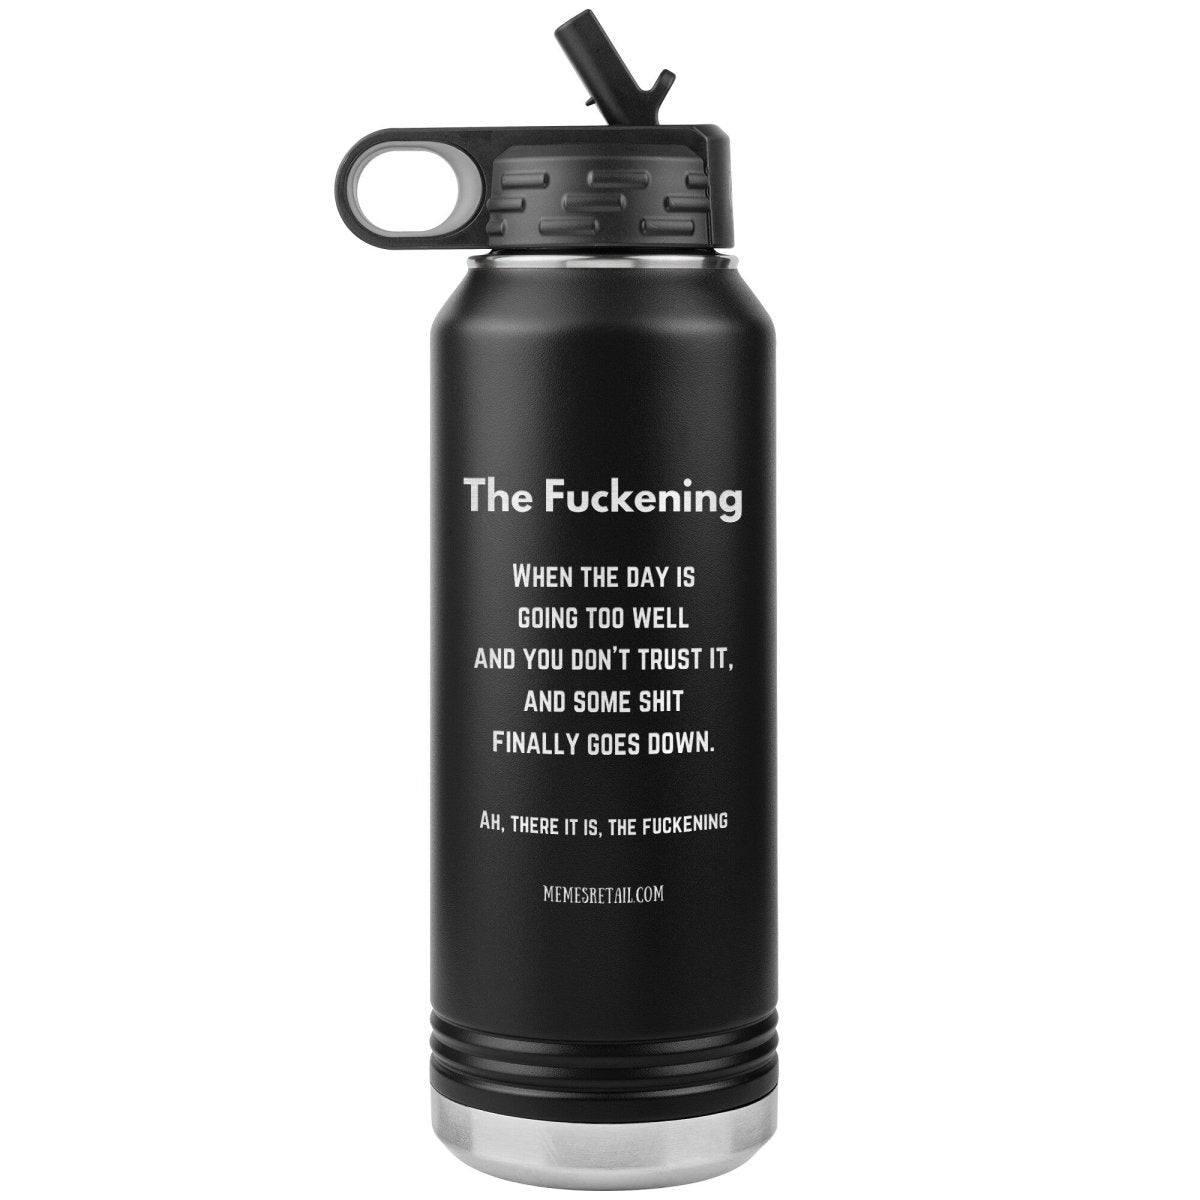 The Fuckening, When you don't trust the day. 32 oz Water Bottle, Black - MemesRetail.com